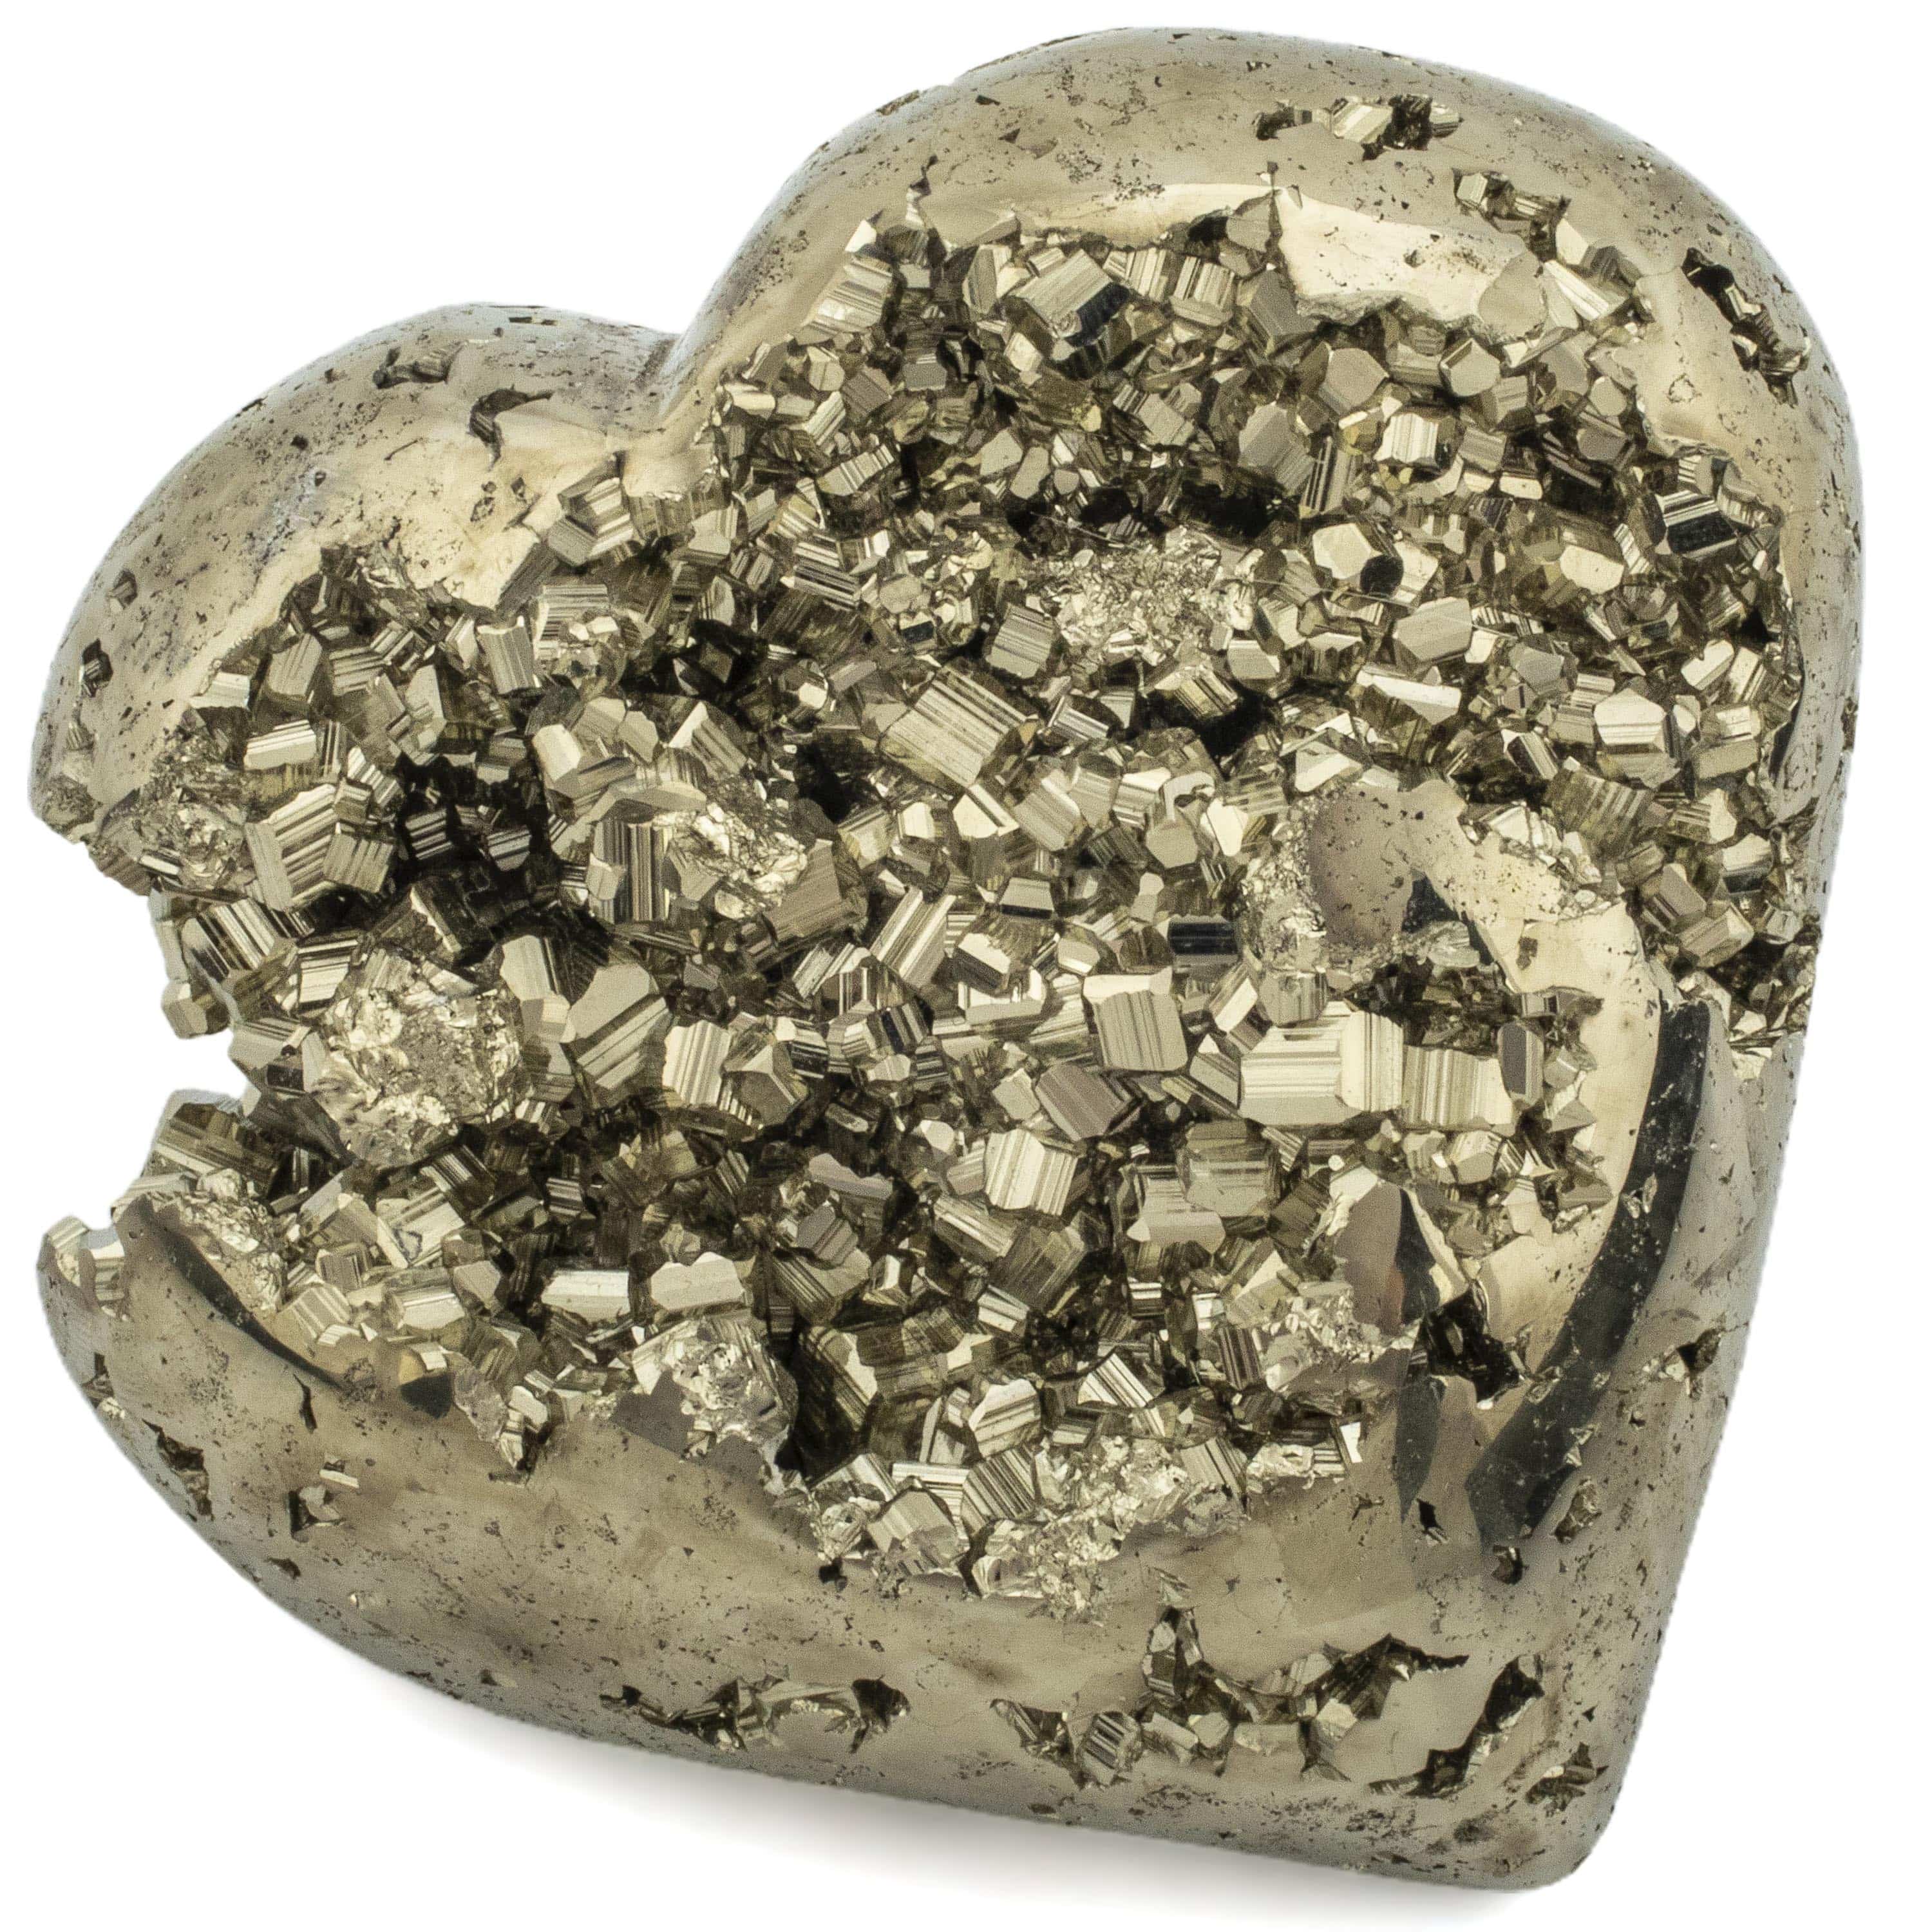 Kalifano Pyrite Pyrite Heart Carving 5" / 700g GH800-PC